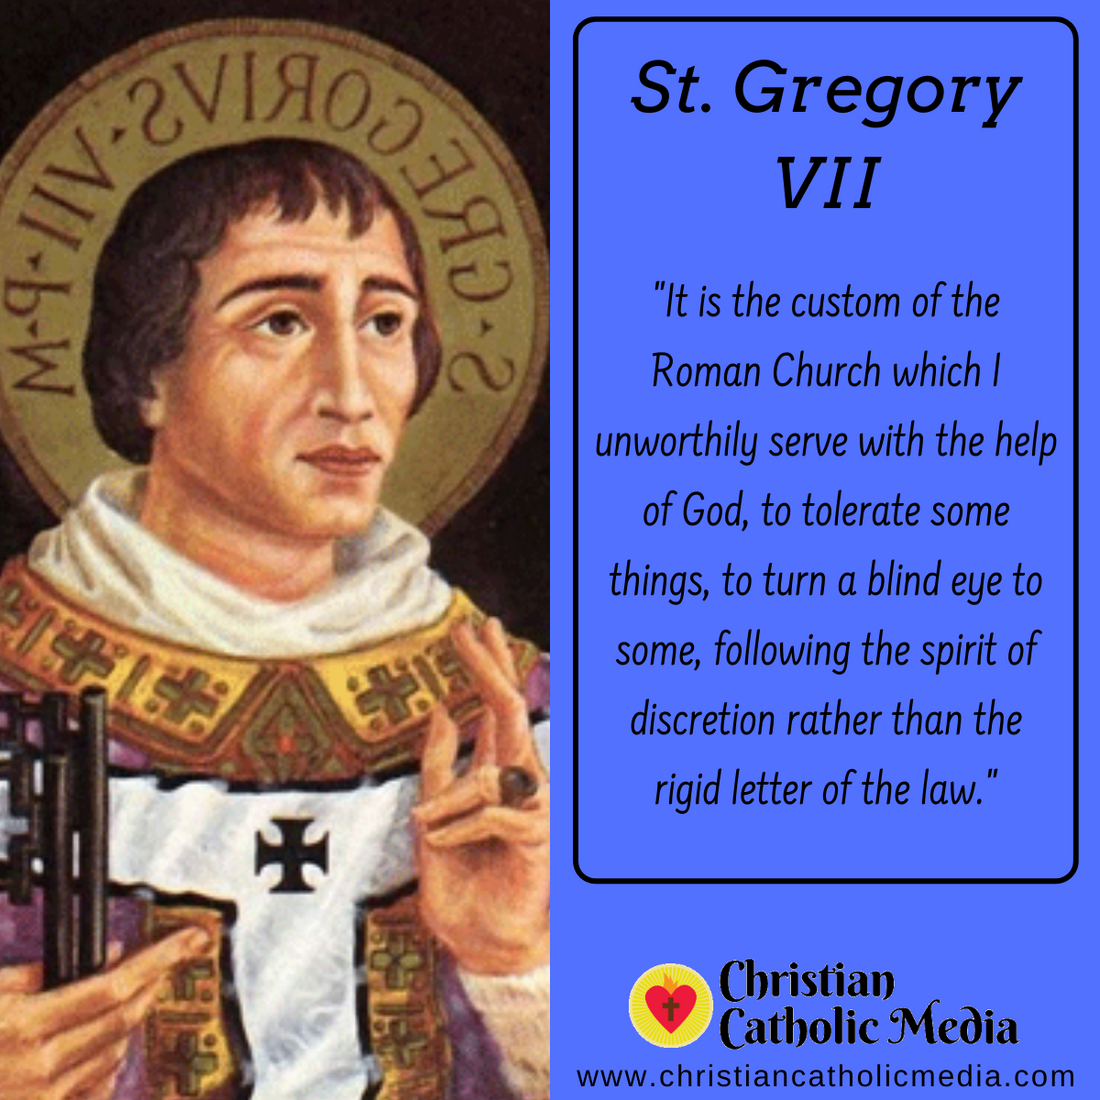 St. Gregory VII - Sunday May 23, 2021